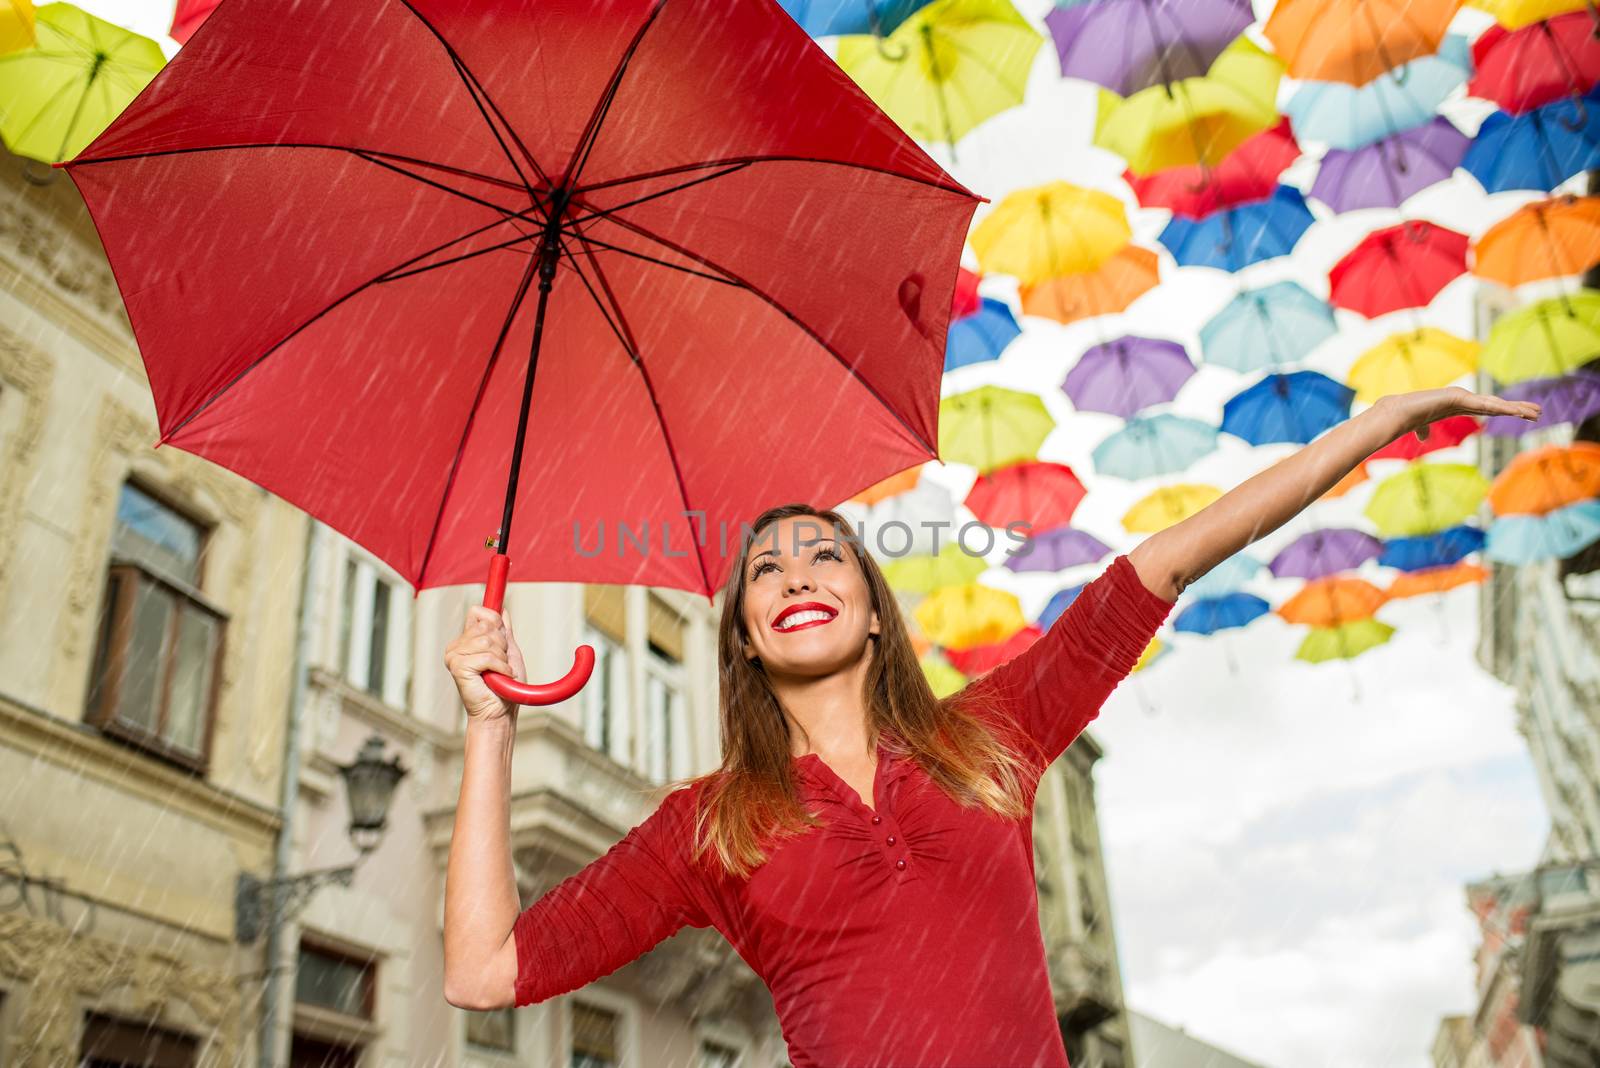 Cute Girl With Red Umbrella by MilanMarkovic78